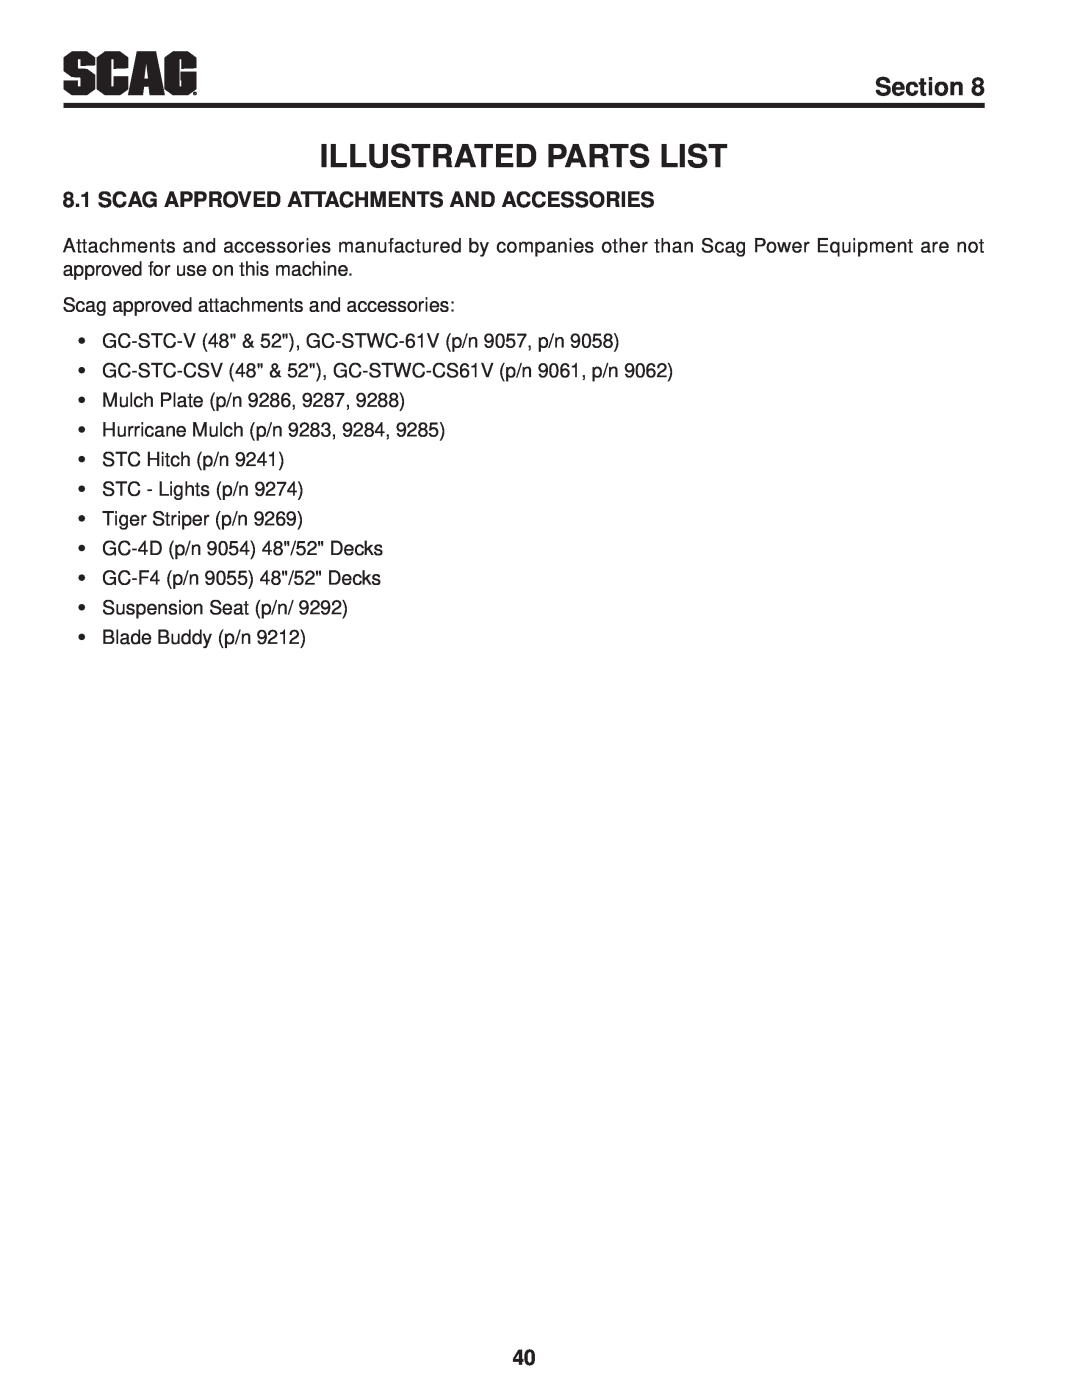 Scag Power Equipment STWC48V-26KA-LC Illustrated Parts List, Scag Approved Attachments And Accessories, Section 